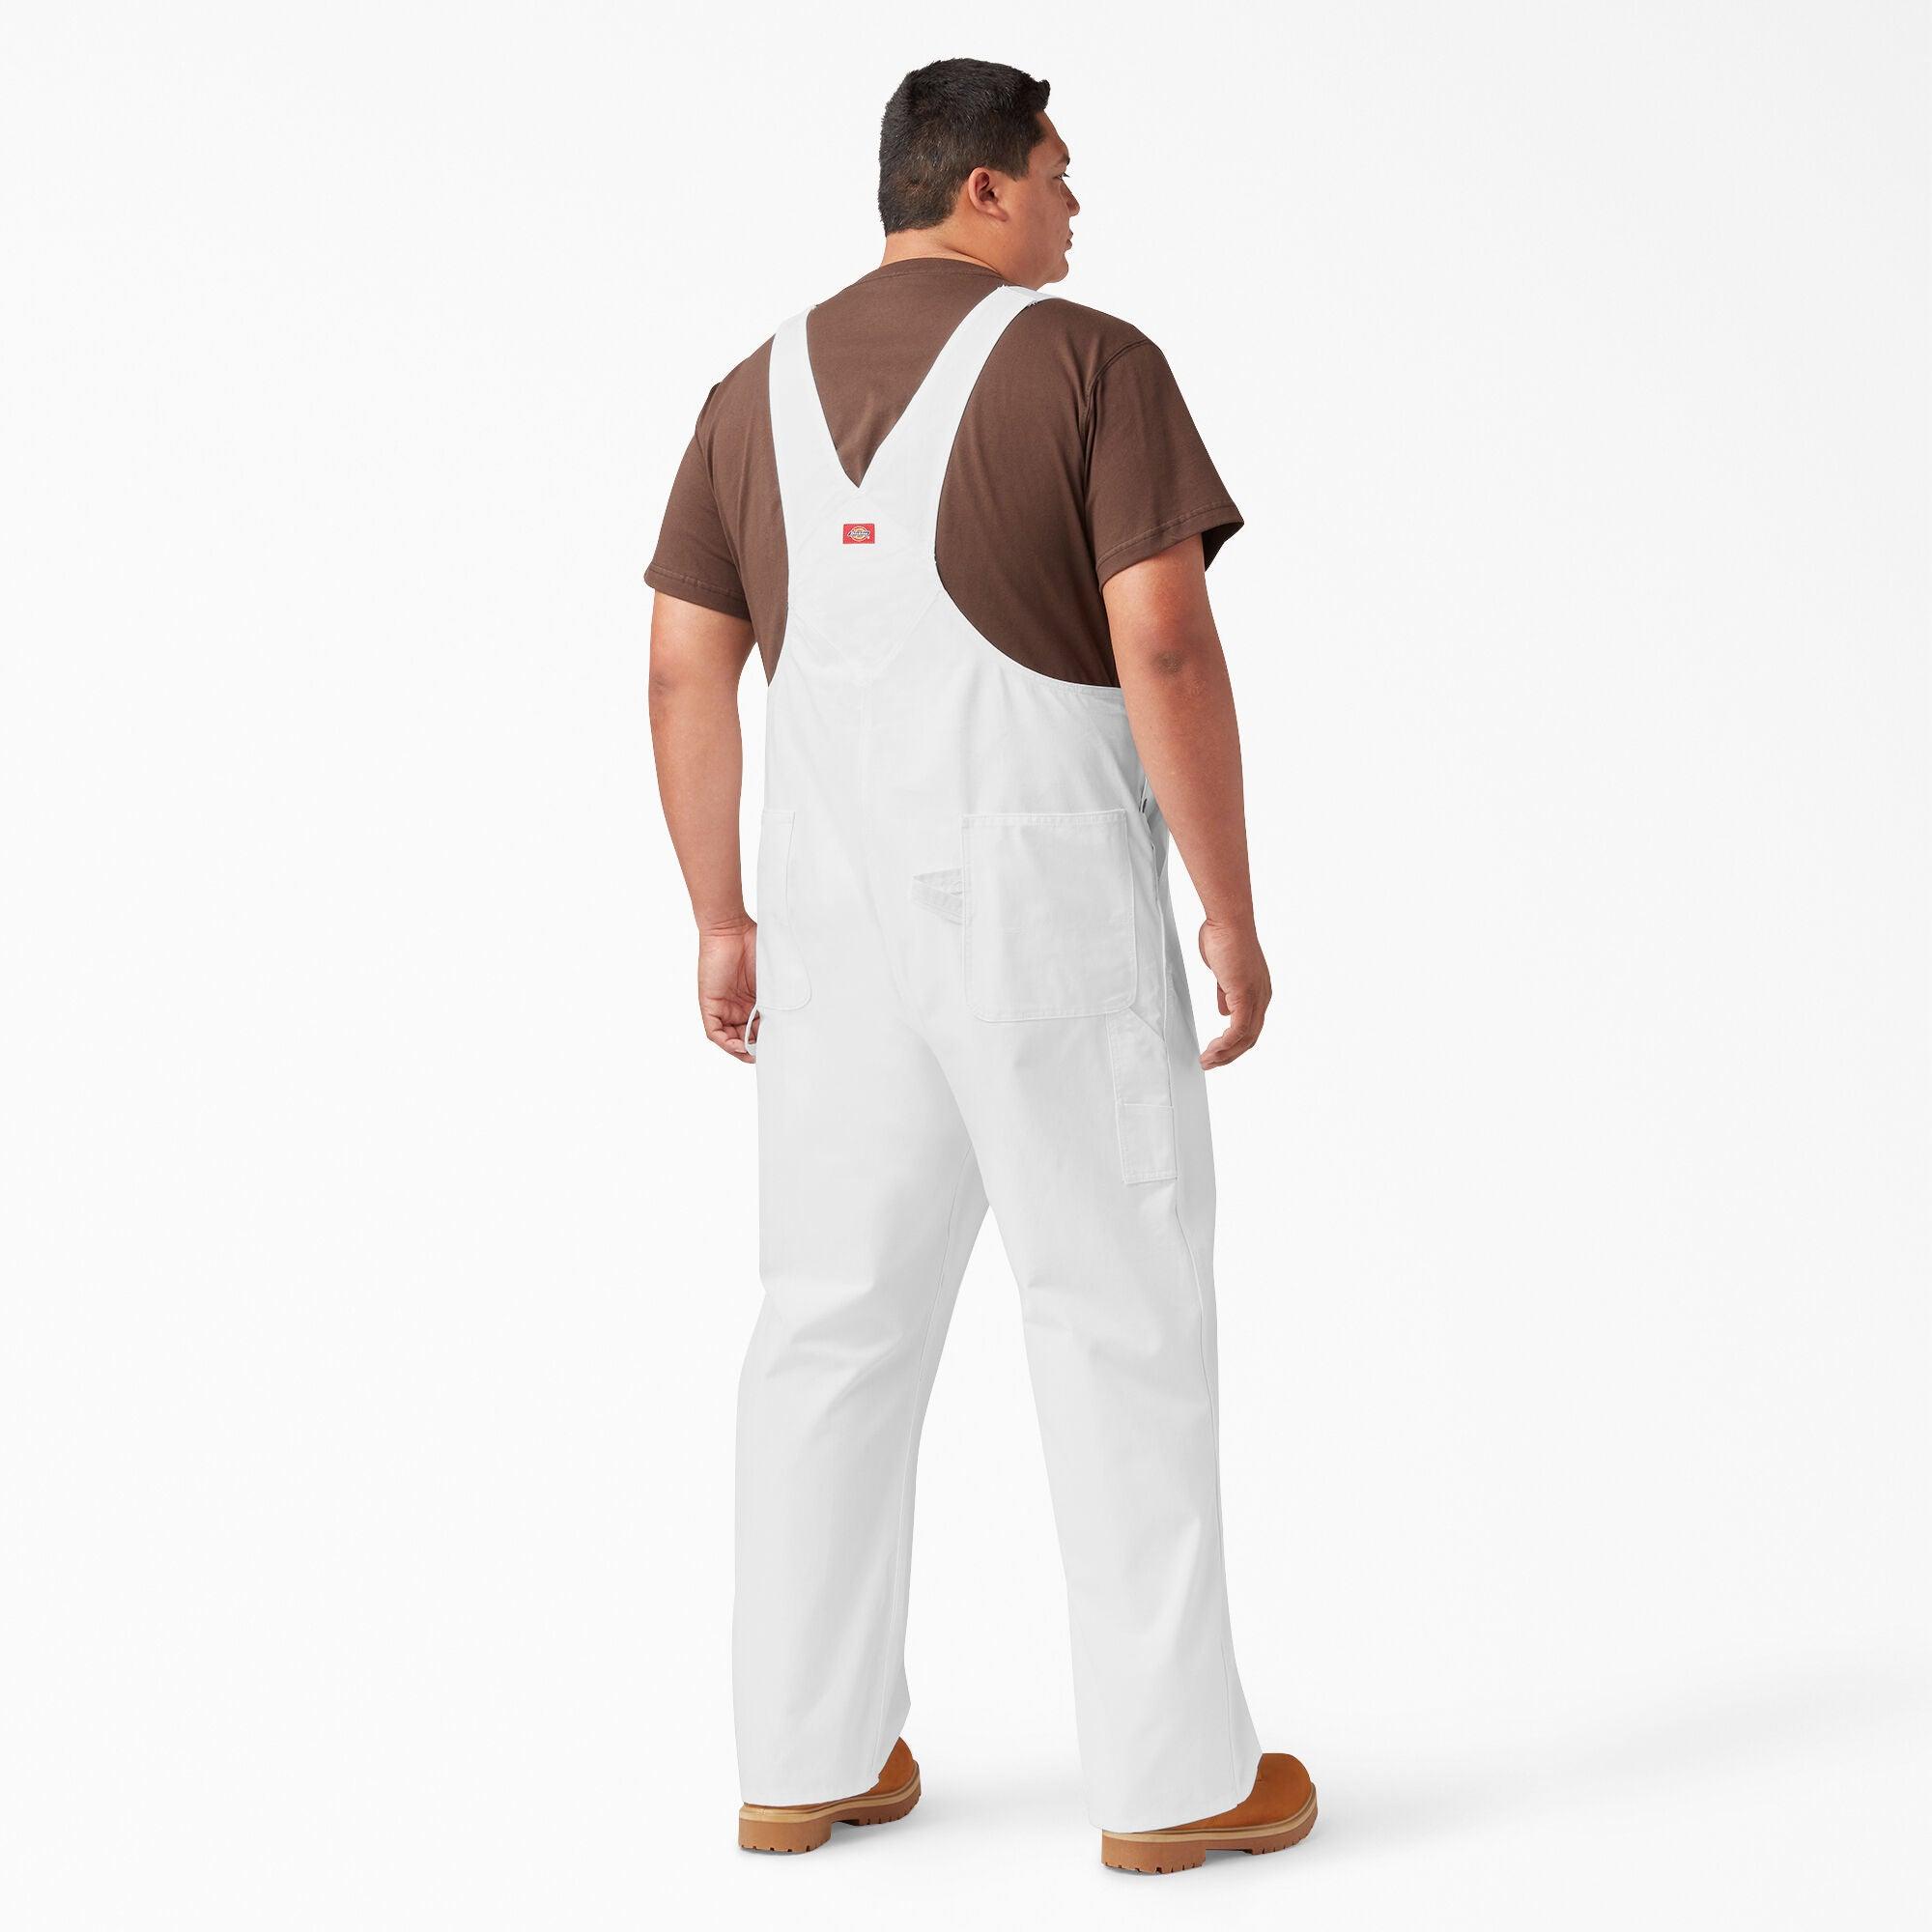 Painter's Bib Overalls, White - Purpose-Built / Home of the Trades